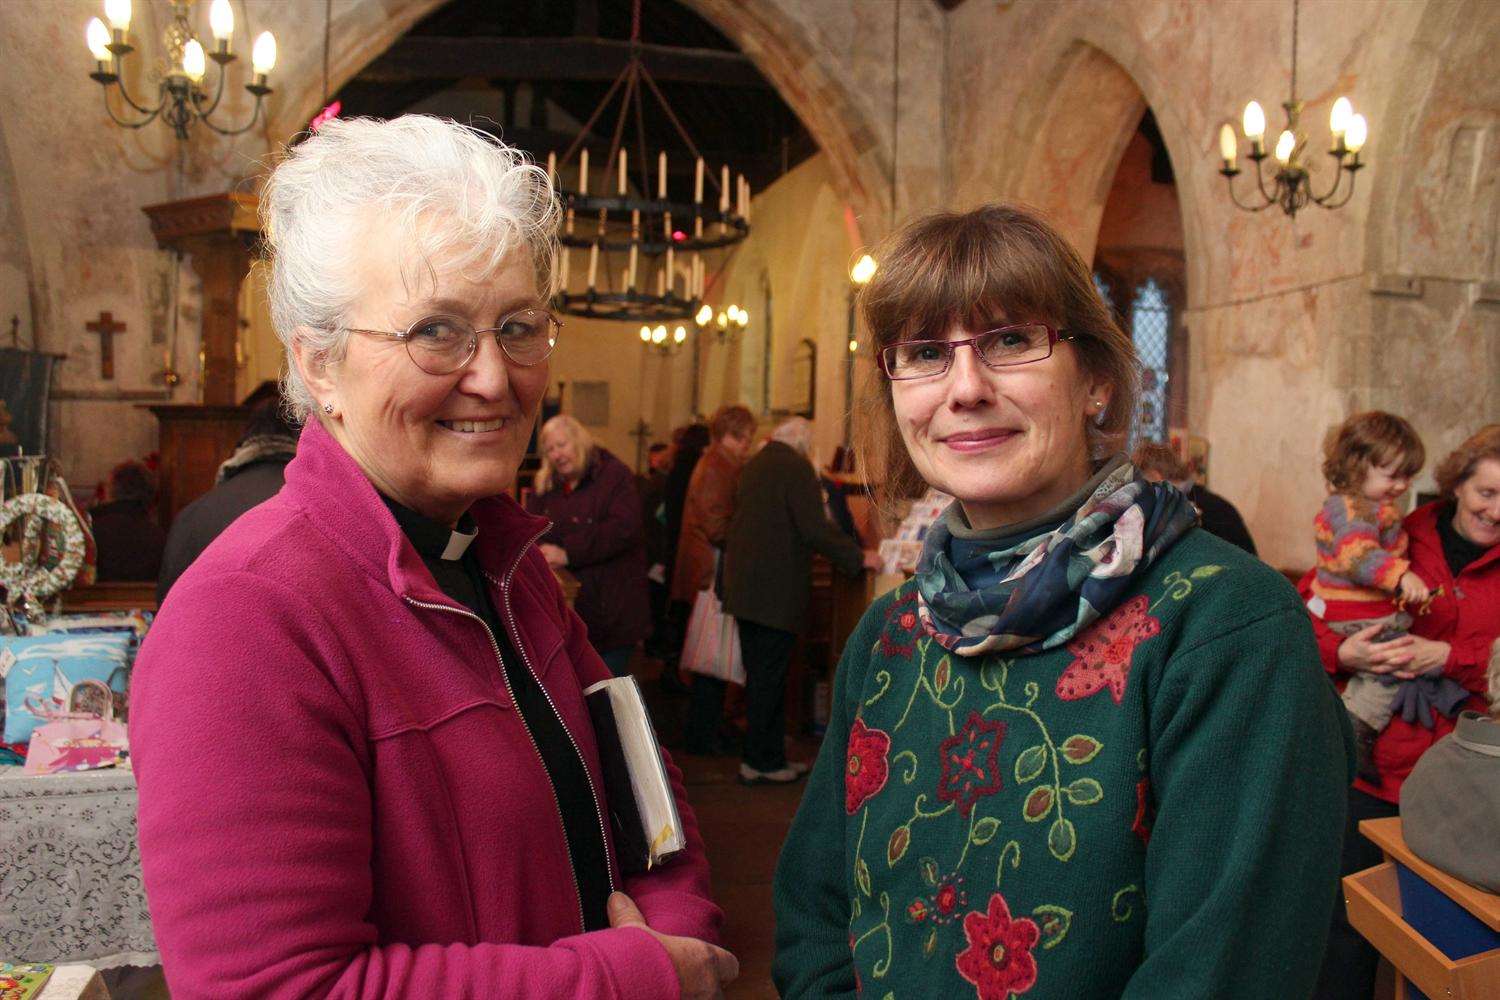 The Reverend Jacky Davis (left) said she is happy with the General Synod's decision.